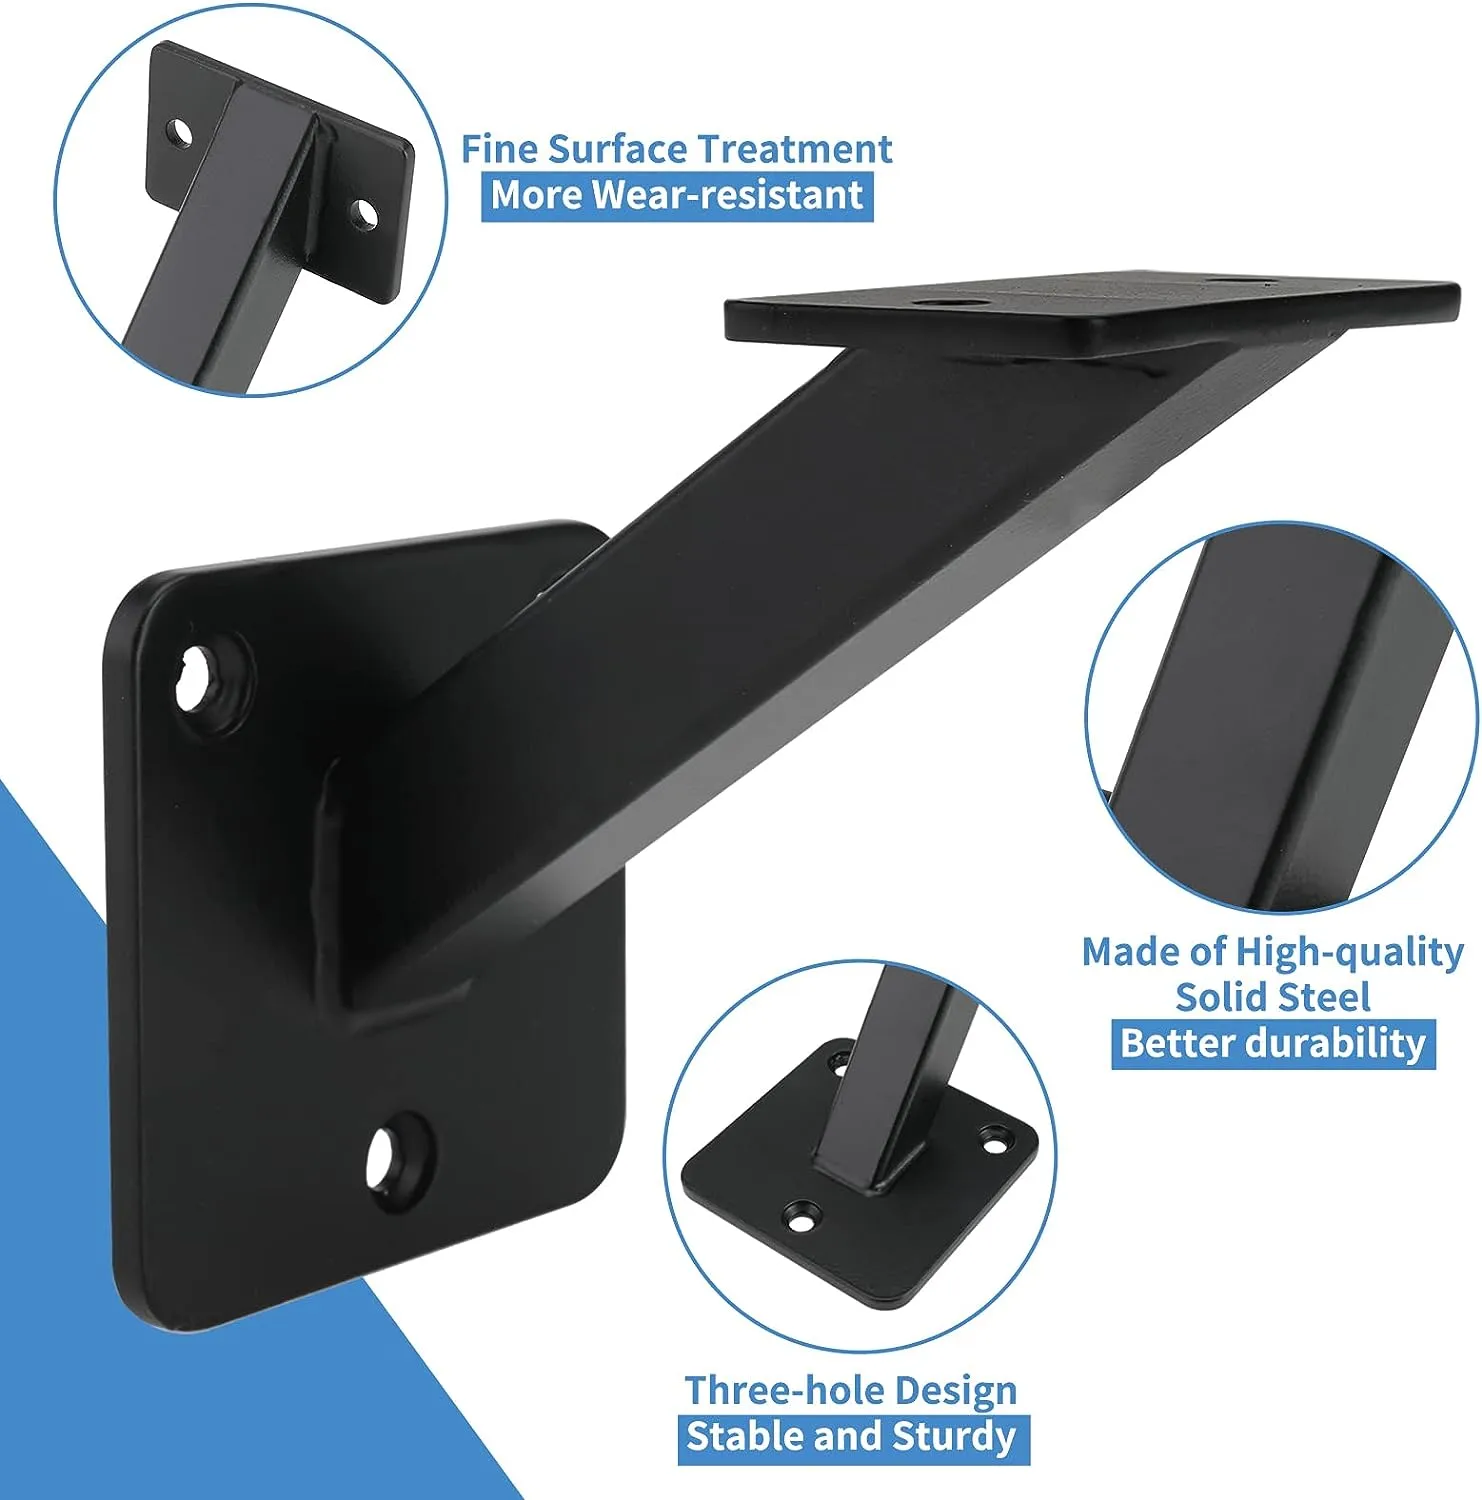 Wall Mounted Handrail Brackets for Staircase - Buy handrail brackets, wall mounted handrail, railing brackets Product on Surealong